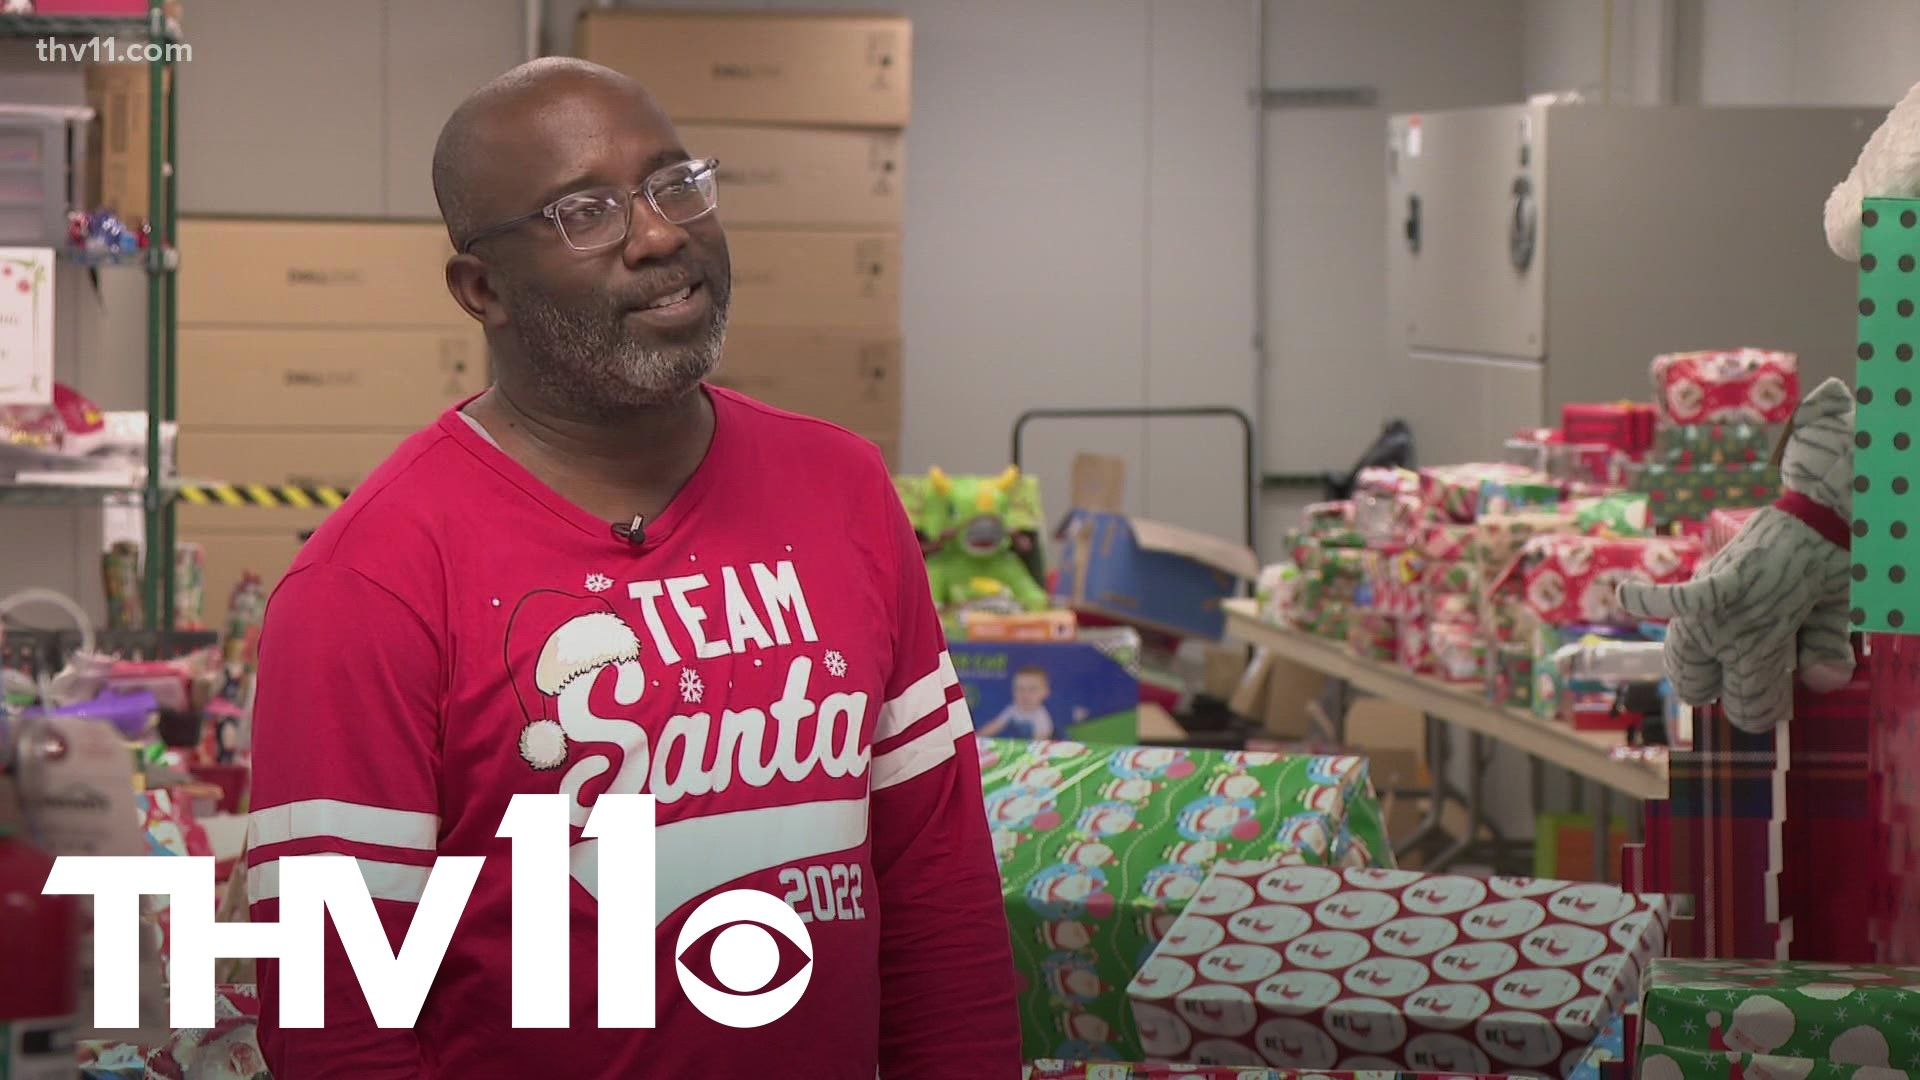 Christmas is less than a month away, and one Arkansas man hasn't wasted any time loading up the sleigh and making deliveries— And now he's in need of your help.